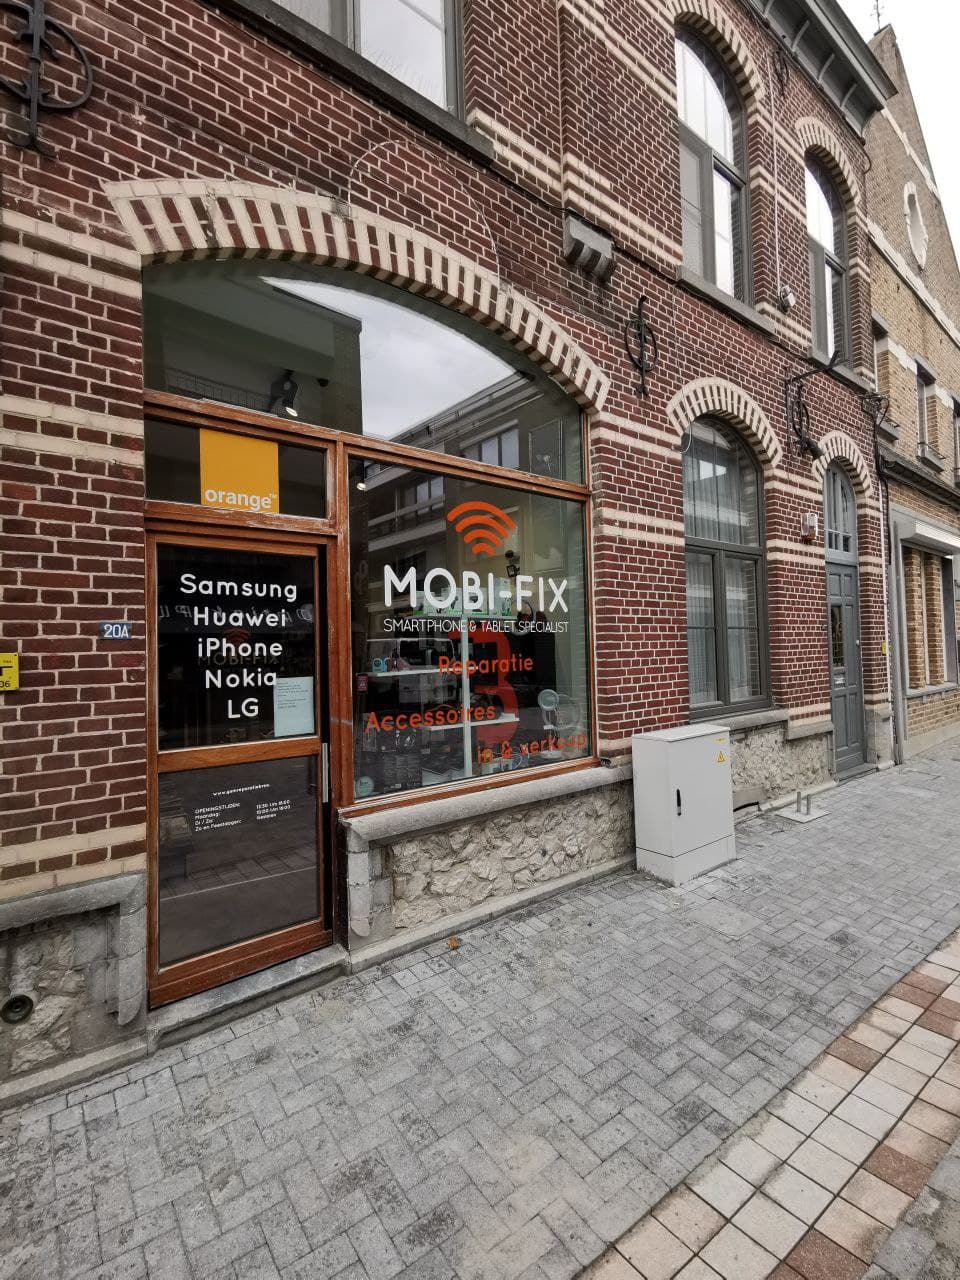 Bitcoin atm in the Mobi-Fix on Hoogstraat phono number 1